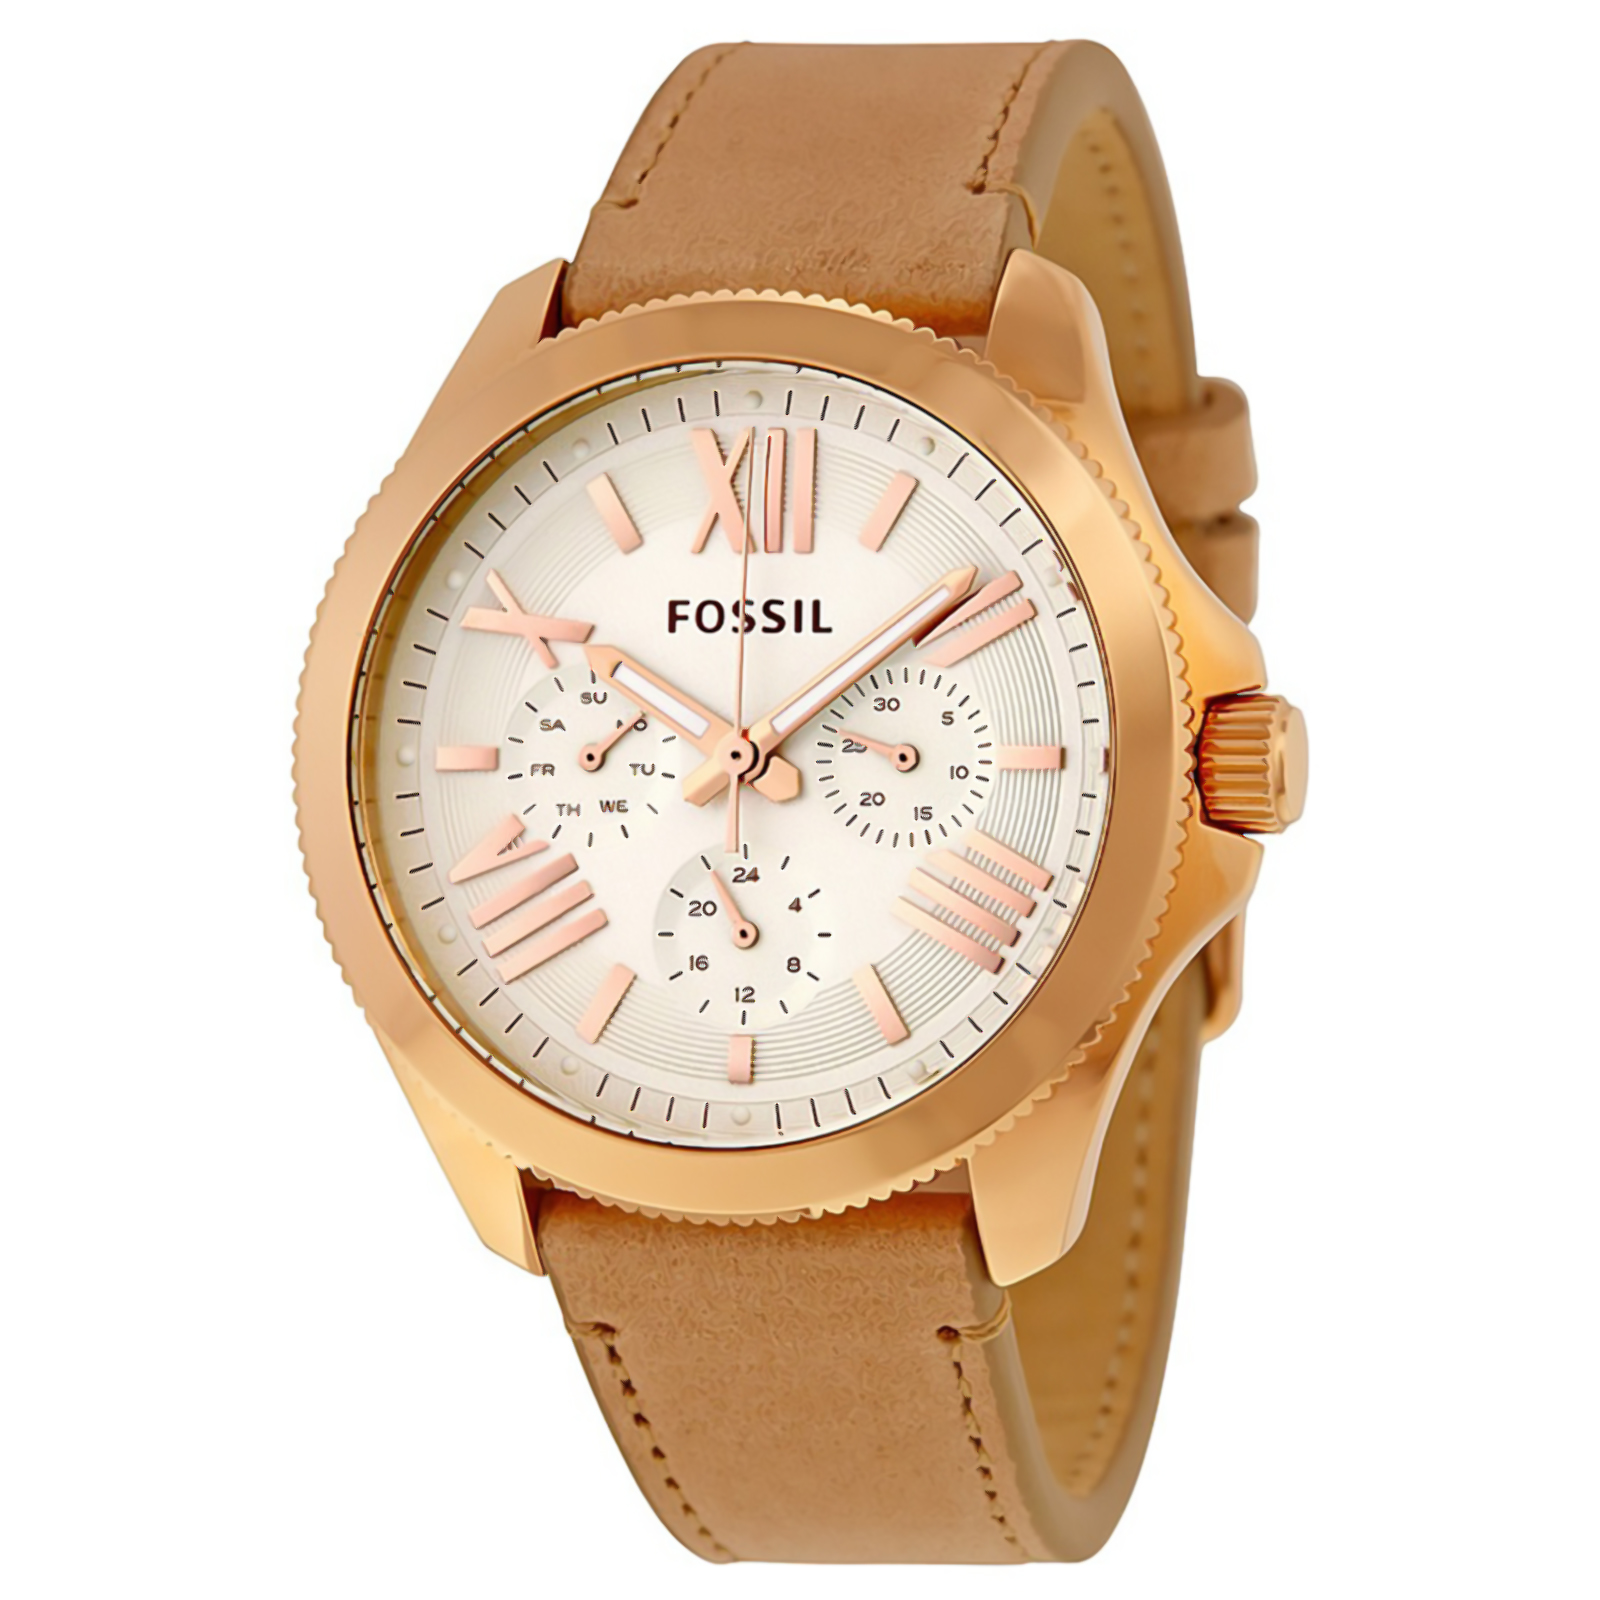 Fossil AM4532 Women’s Cecile Leather Multifunction Watch - Beige